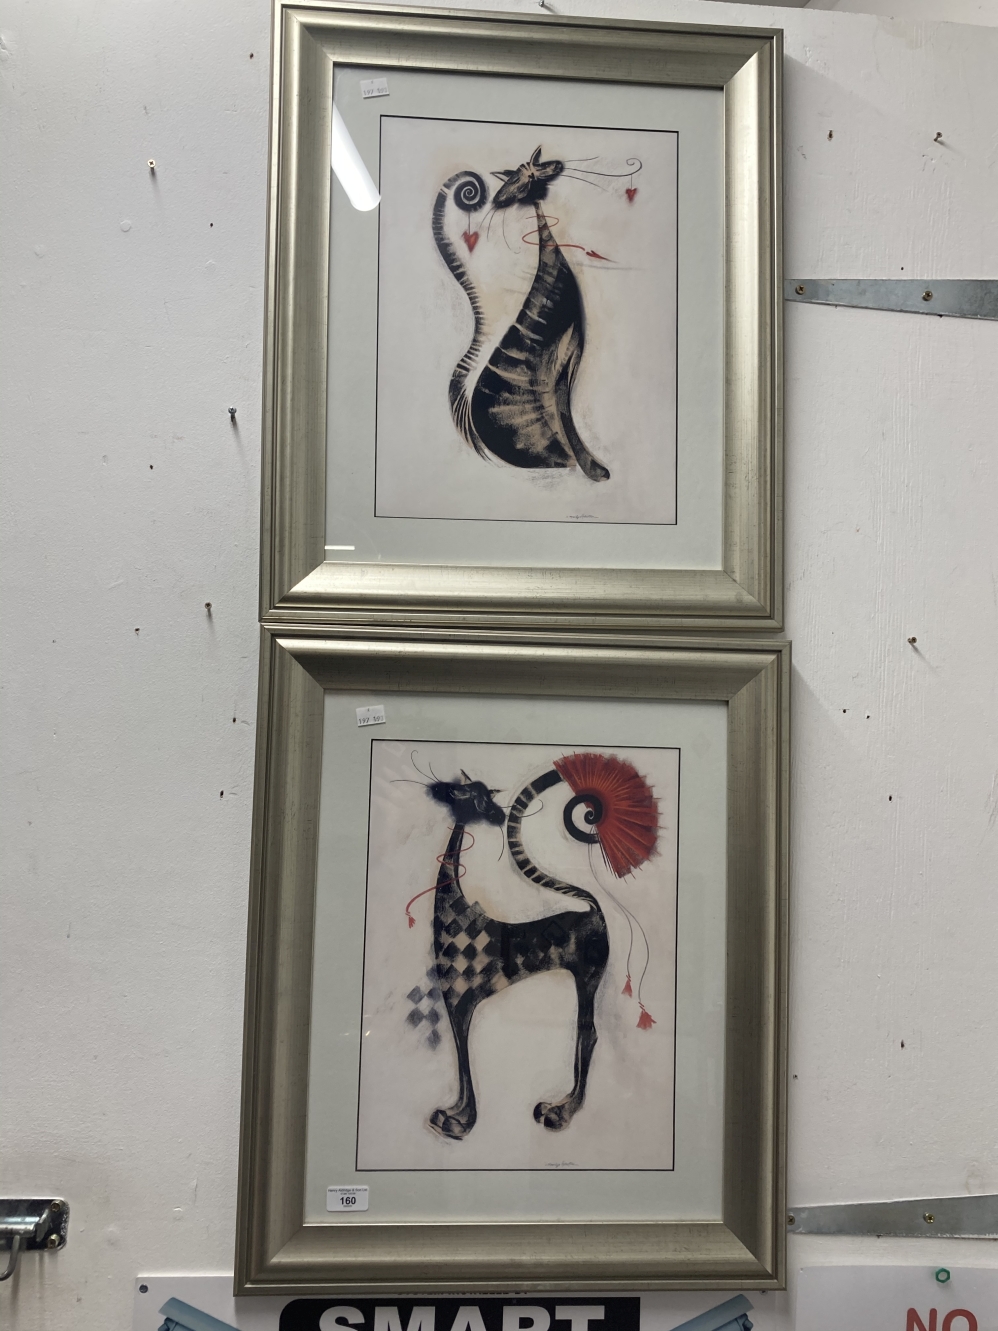 Prints: Cat prints by Marilyn Robertson, framed and glazed. 19½ins. x 15½ins. (2)